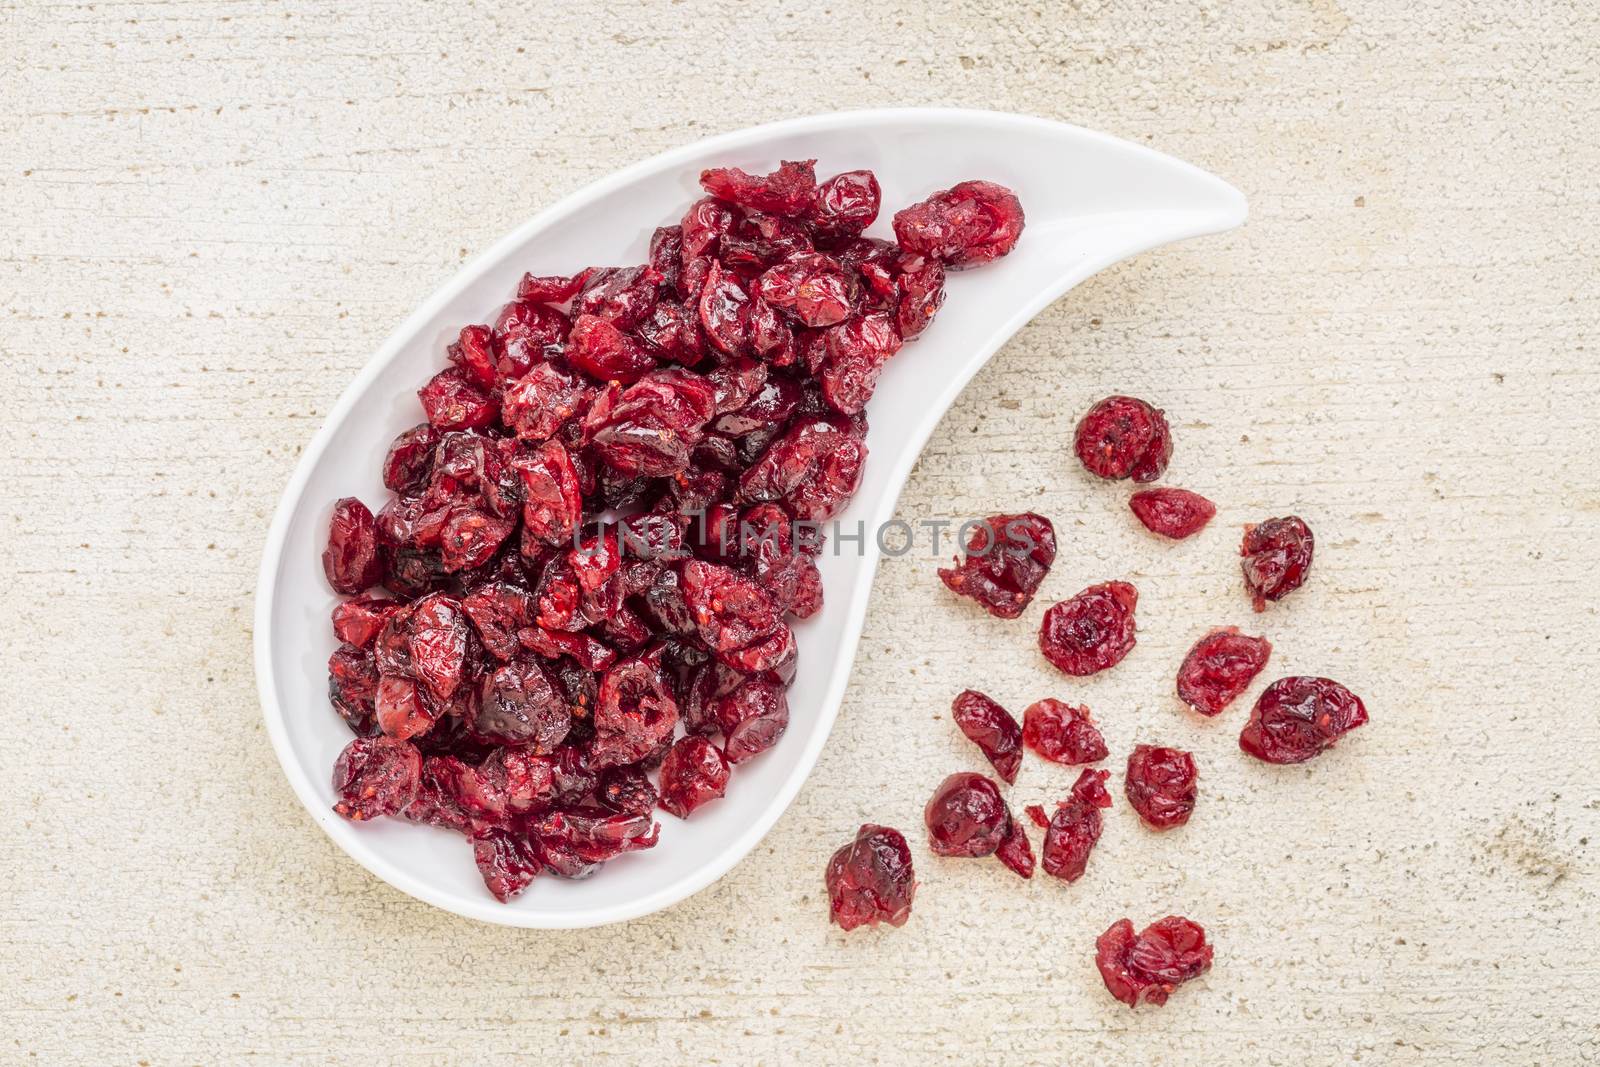 dried cranberry on a teardrop shaped bowl against a rustic barn wood